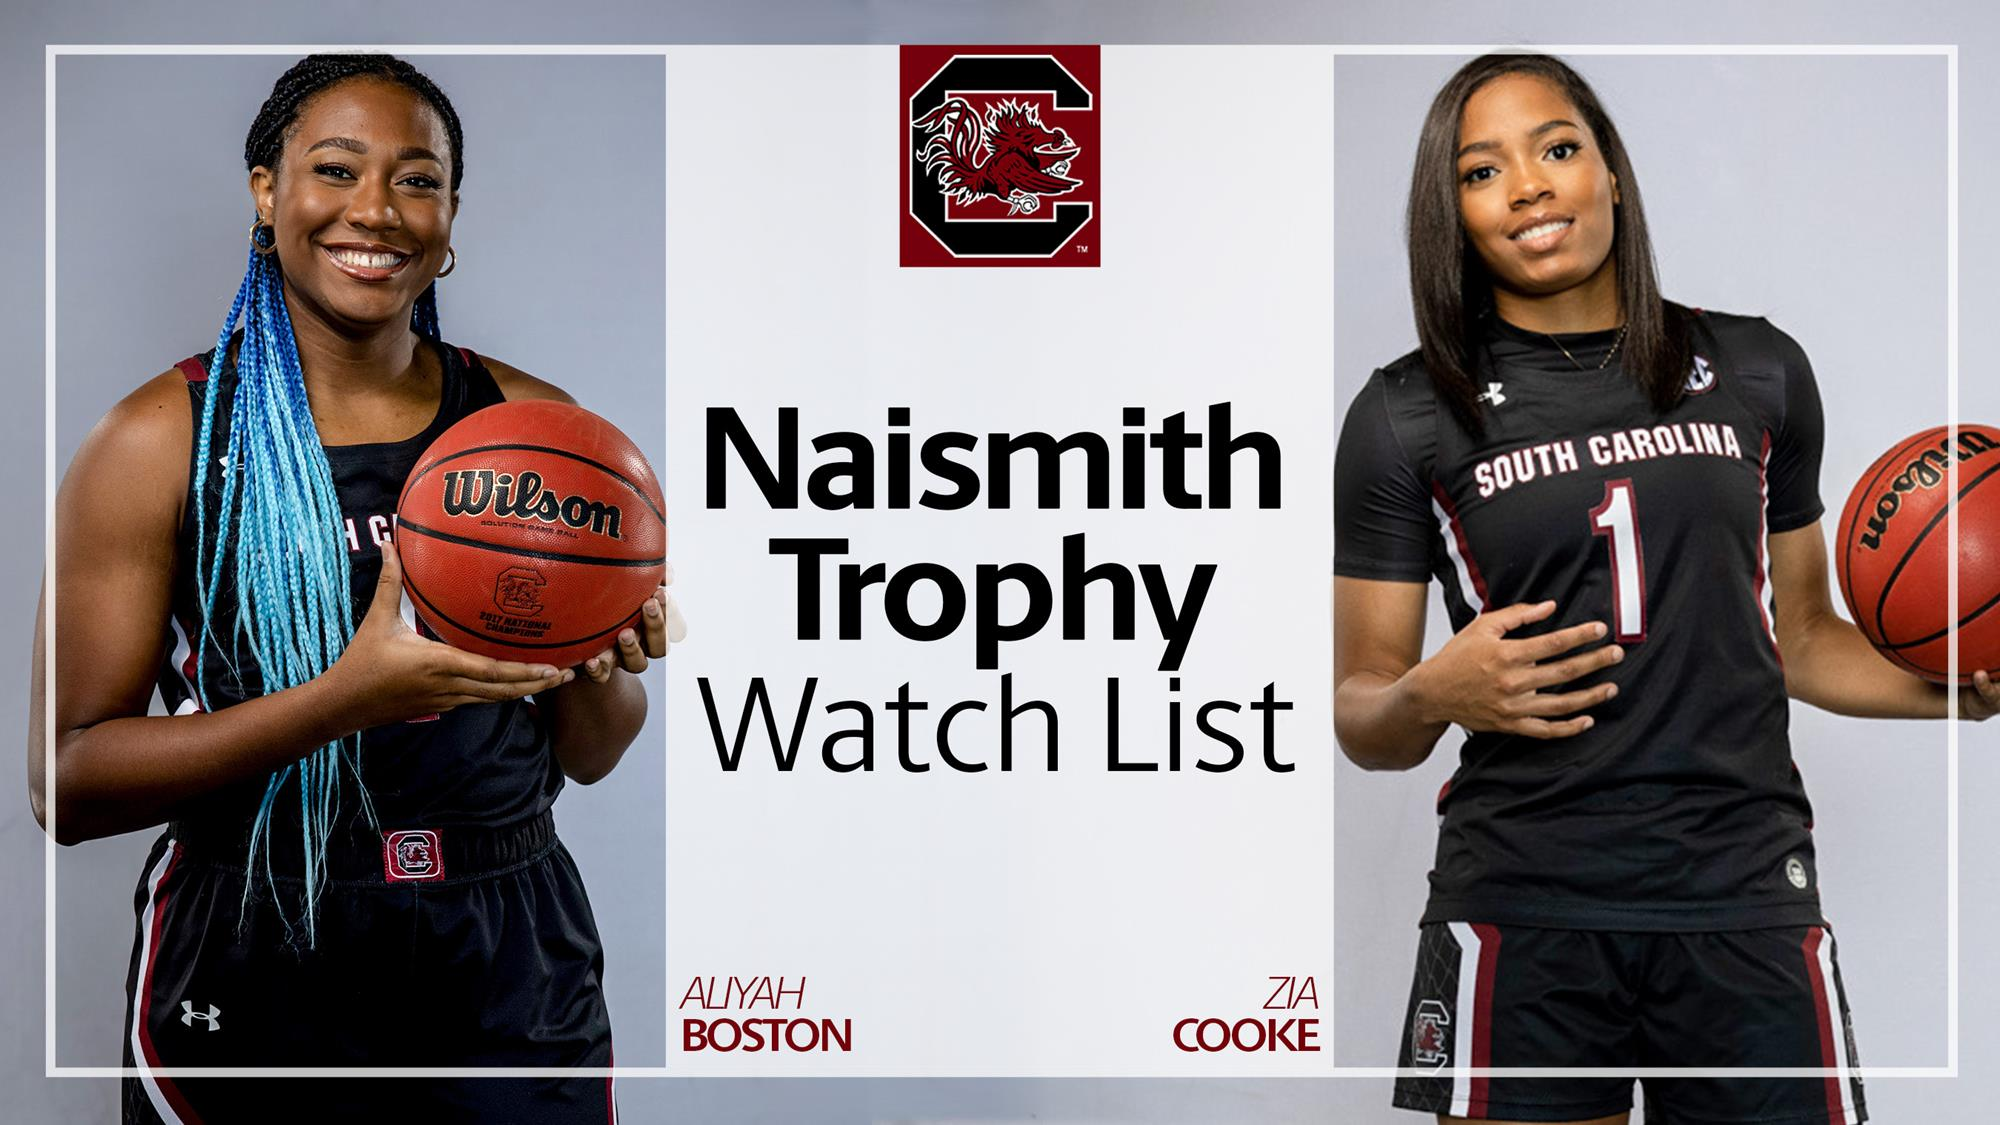 Boston, Cooke on Naismith Trophy Watch List